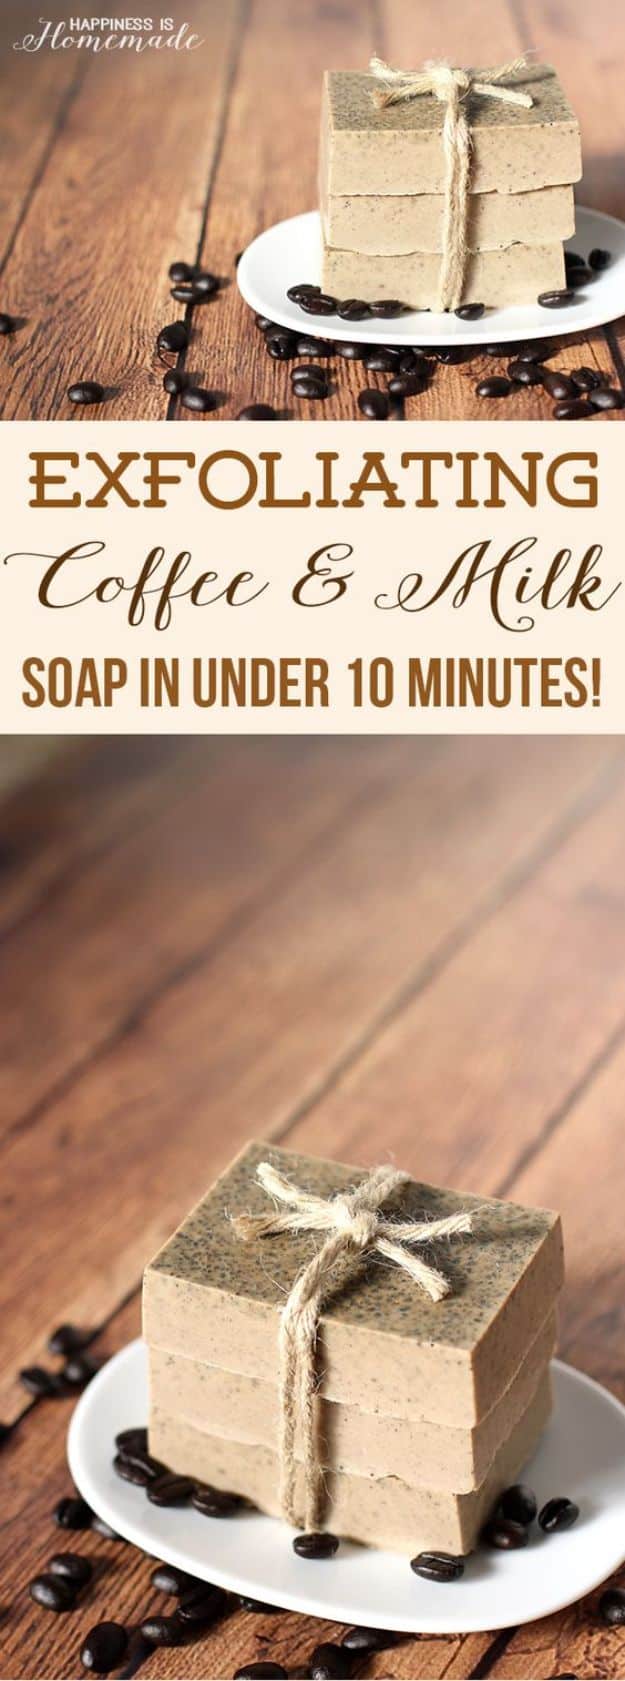 DIY Ideas for The Coffee Lover - Goat Milk And Coffee Homemade Natural Soap - Easy and Cool Gift Ideas for People Who Love Coffee Drinks - Coaster, Cups and Mugs, Tumblers, Canisters and Do It Yourself Gift Ideas - Gift Jars and Baskets, Fun Presents to Make for Mom, Dad and Friends http://diyjoy.com/diy-ideas-coffee-lover